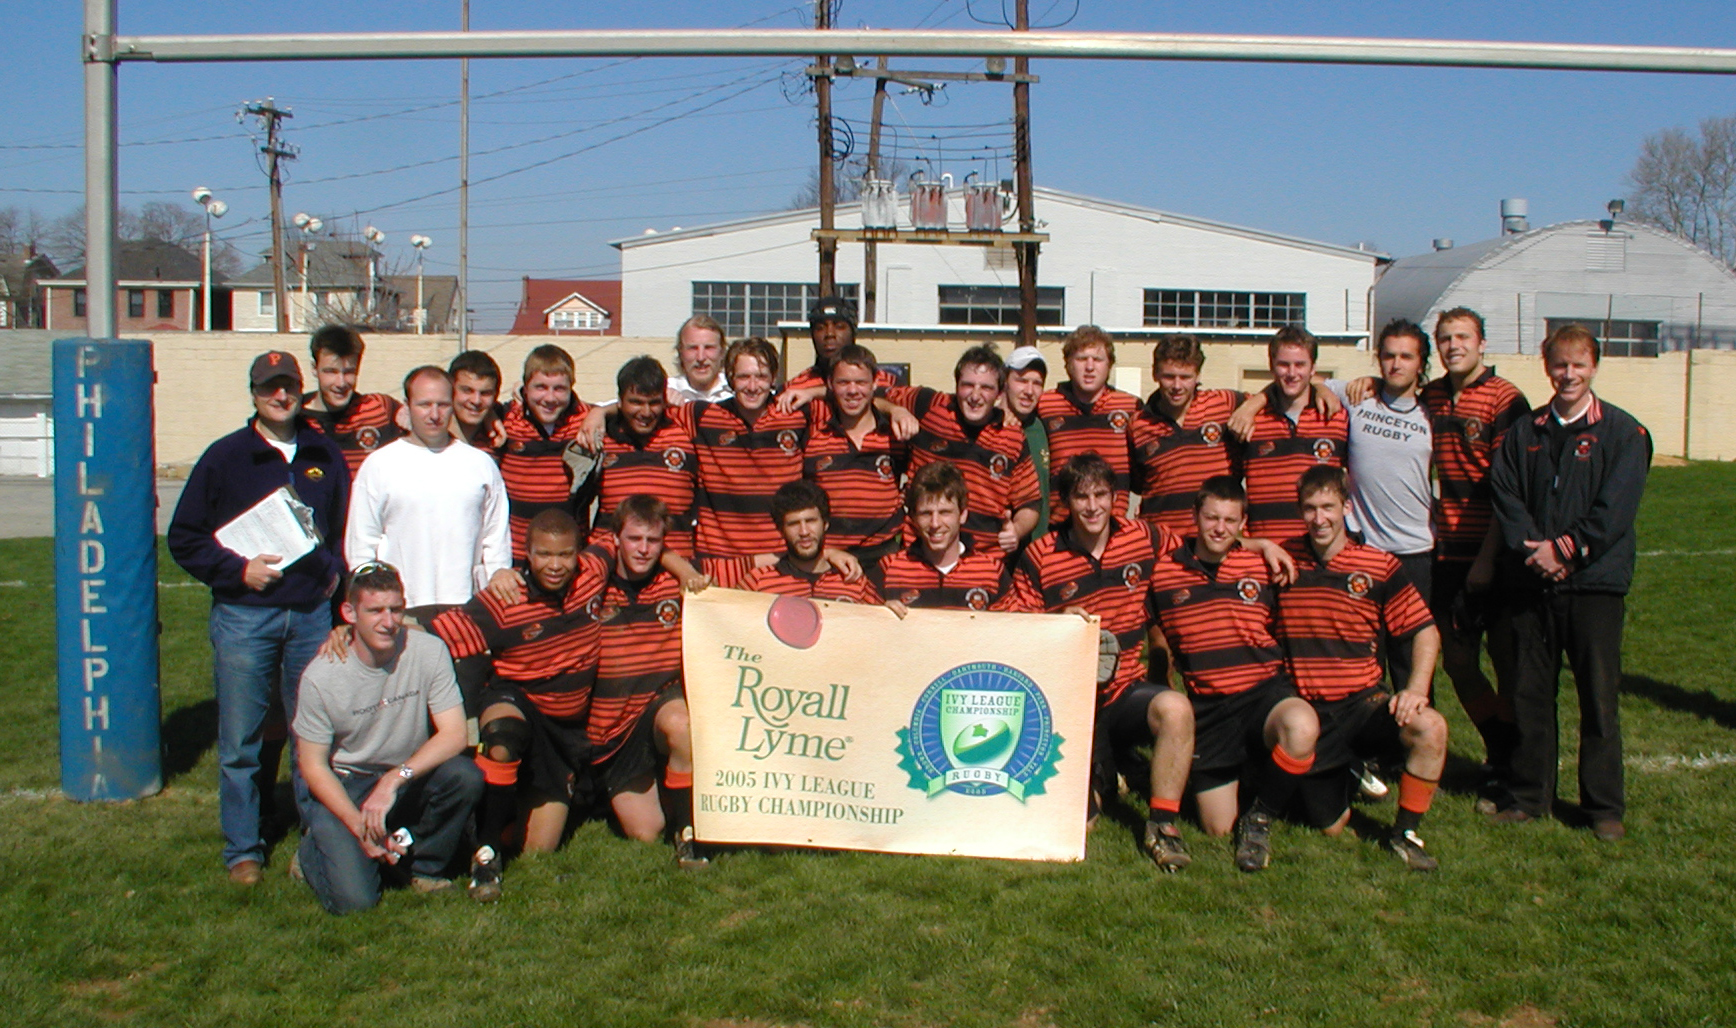 2005 Princeton Rugby